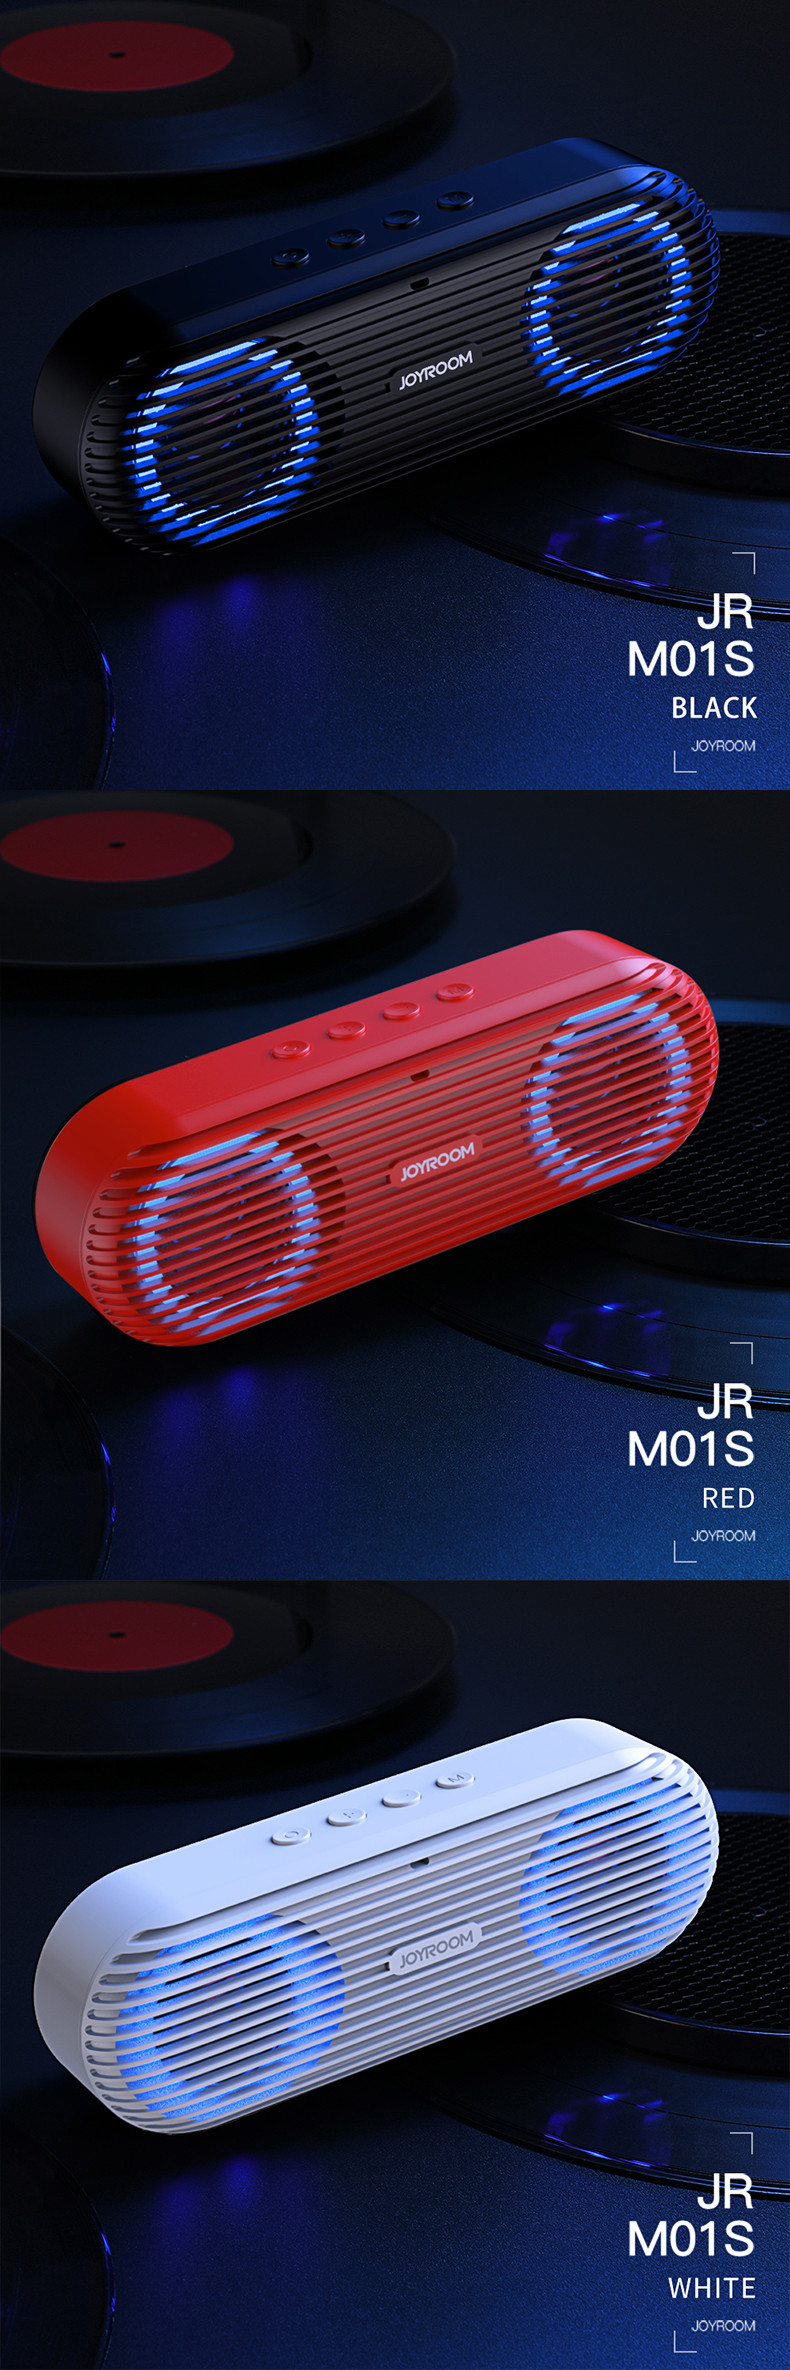 Joyroom-JR-M01S-Portable-2-In-1-Wireless-Blutooth-Lamp-Speaker-Stereo-Sound-With-Revoable-Battery-1395416-10